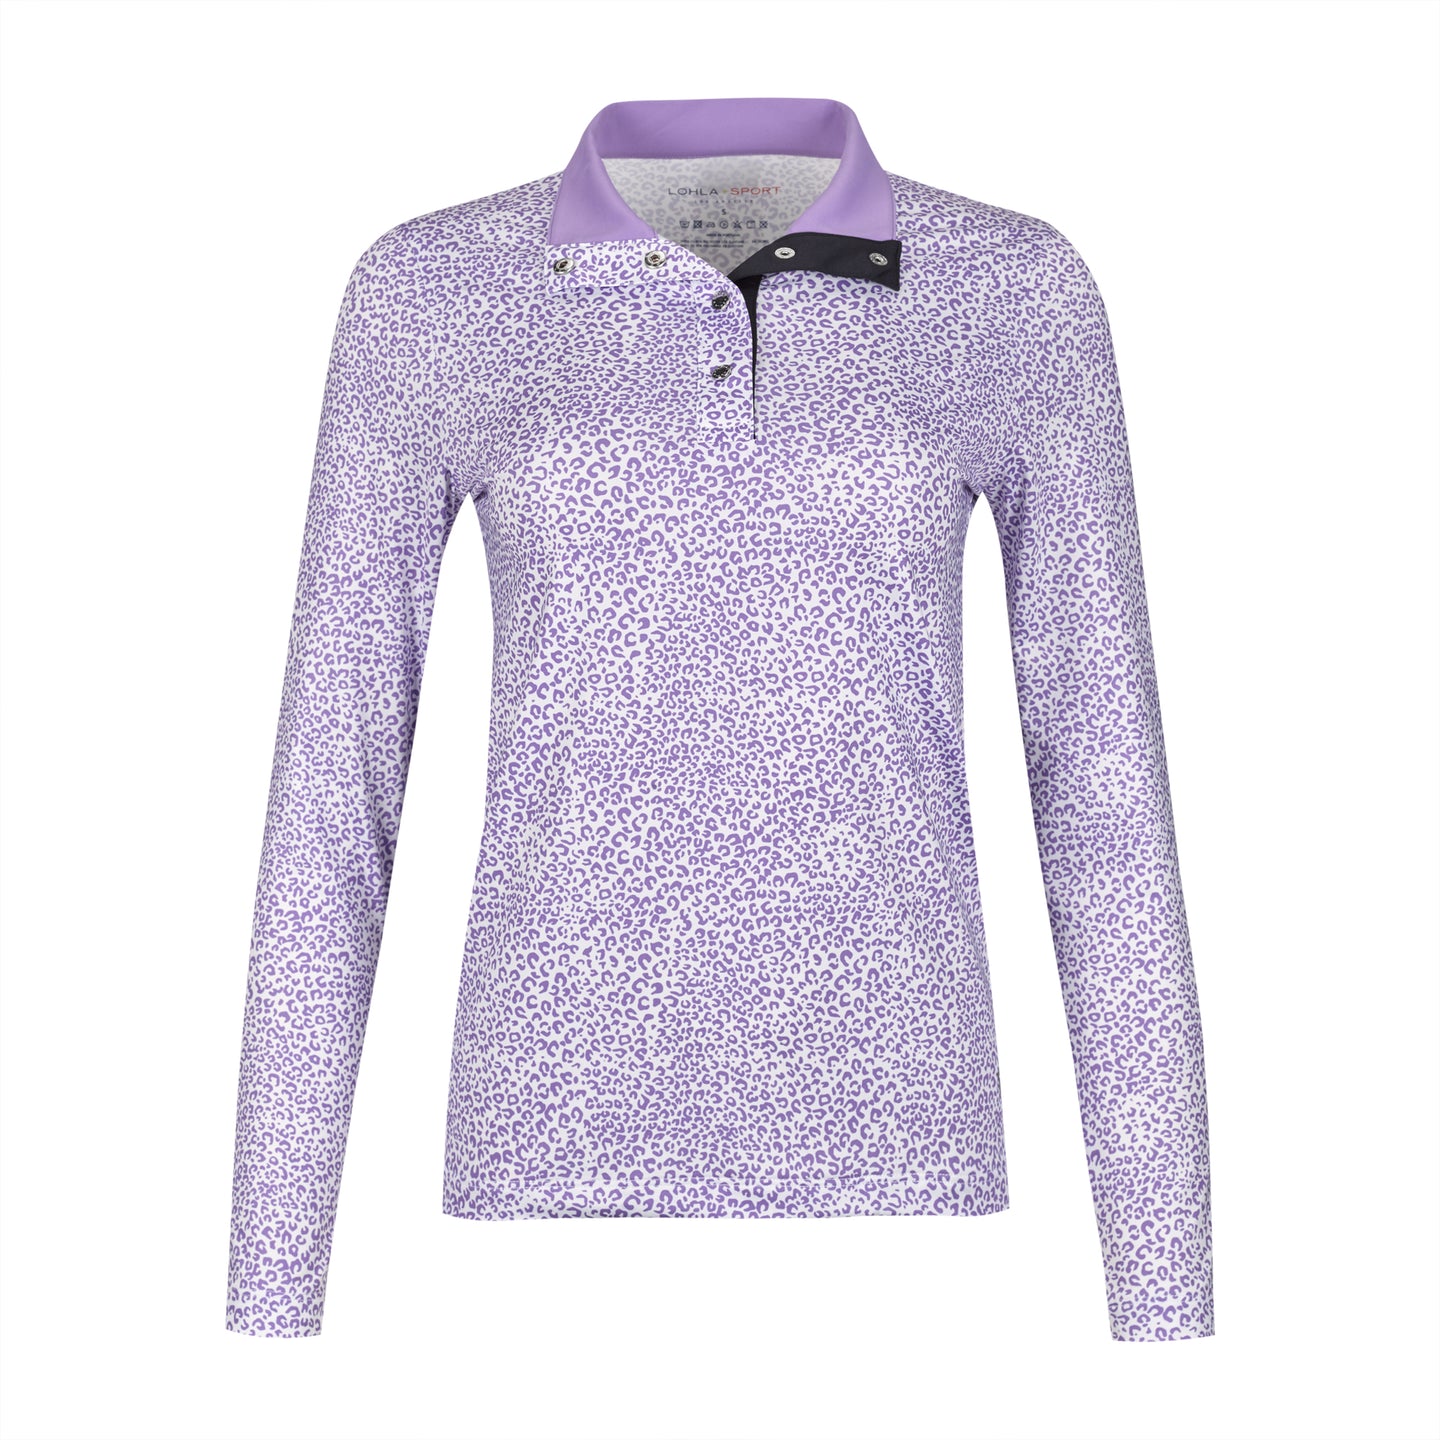 The Lilac Leopard Top